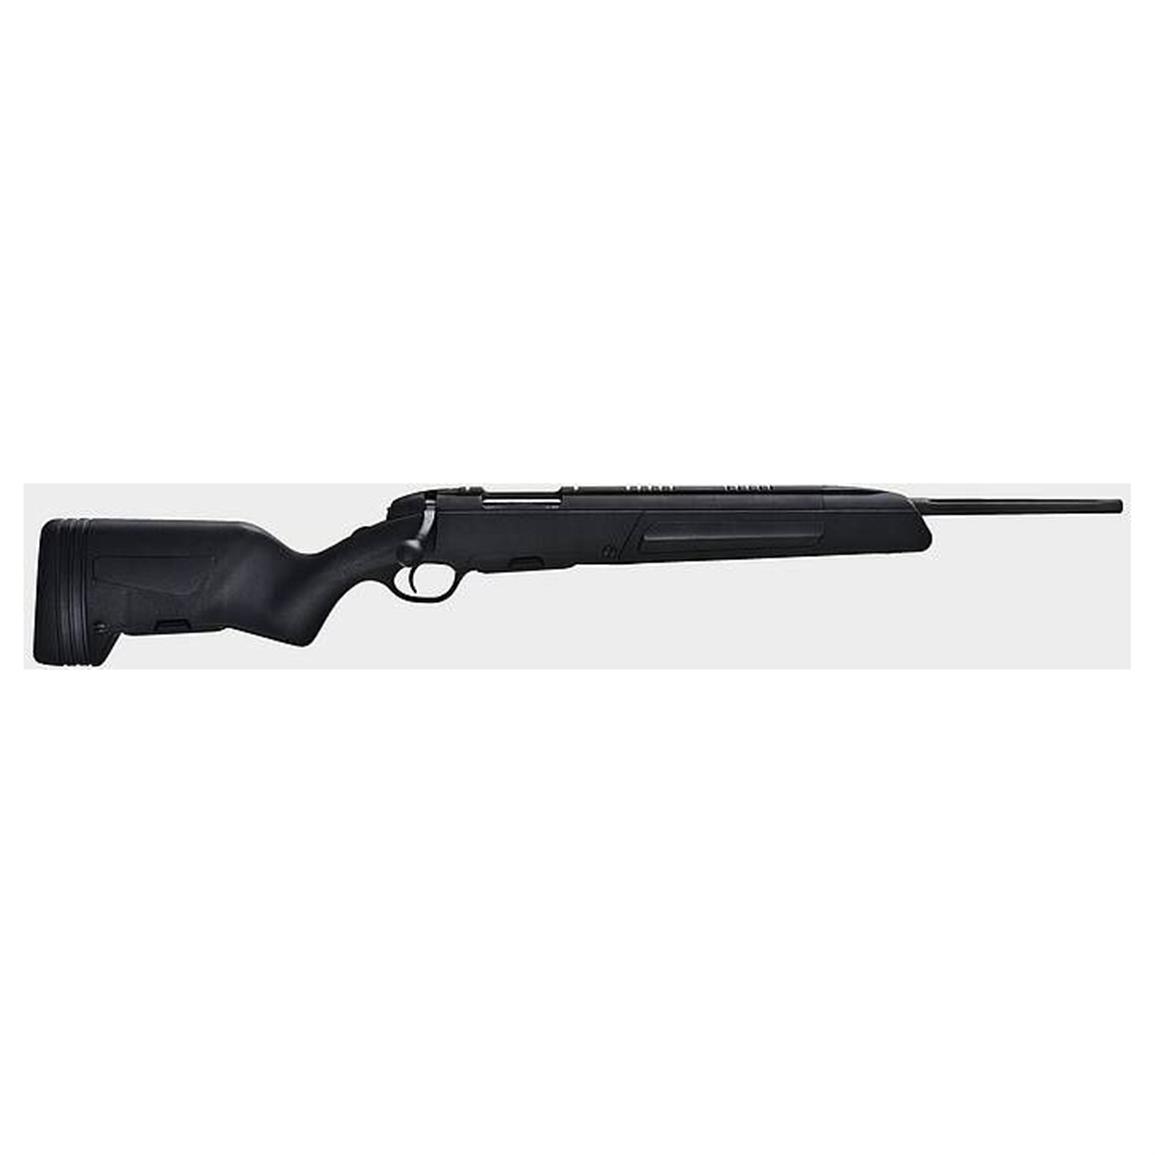 Steyr Scout, Bolt Action, .308 Winchester, 19" Barrel, 5+1 Rounds